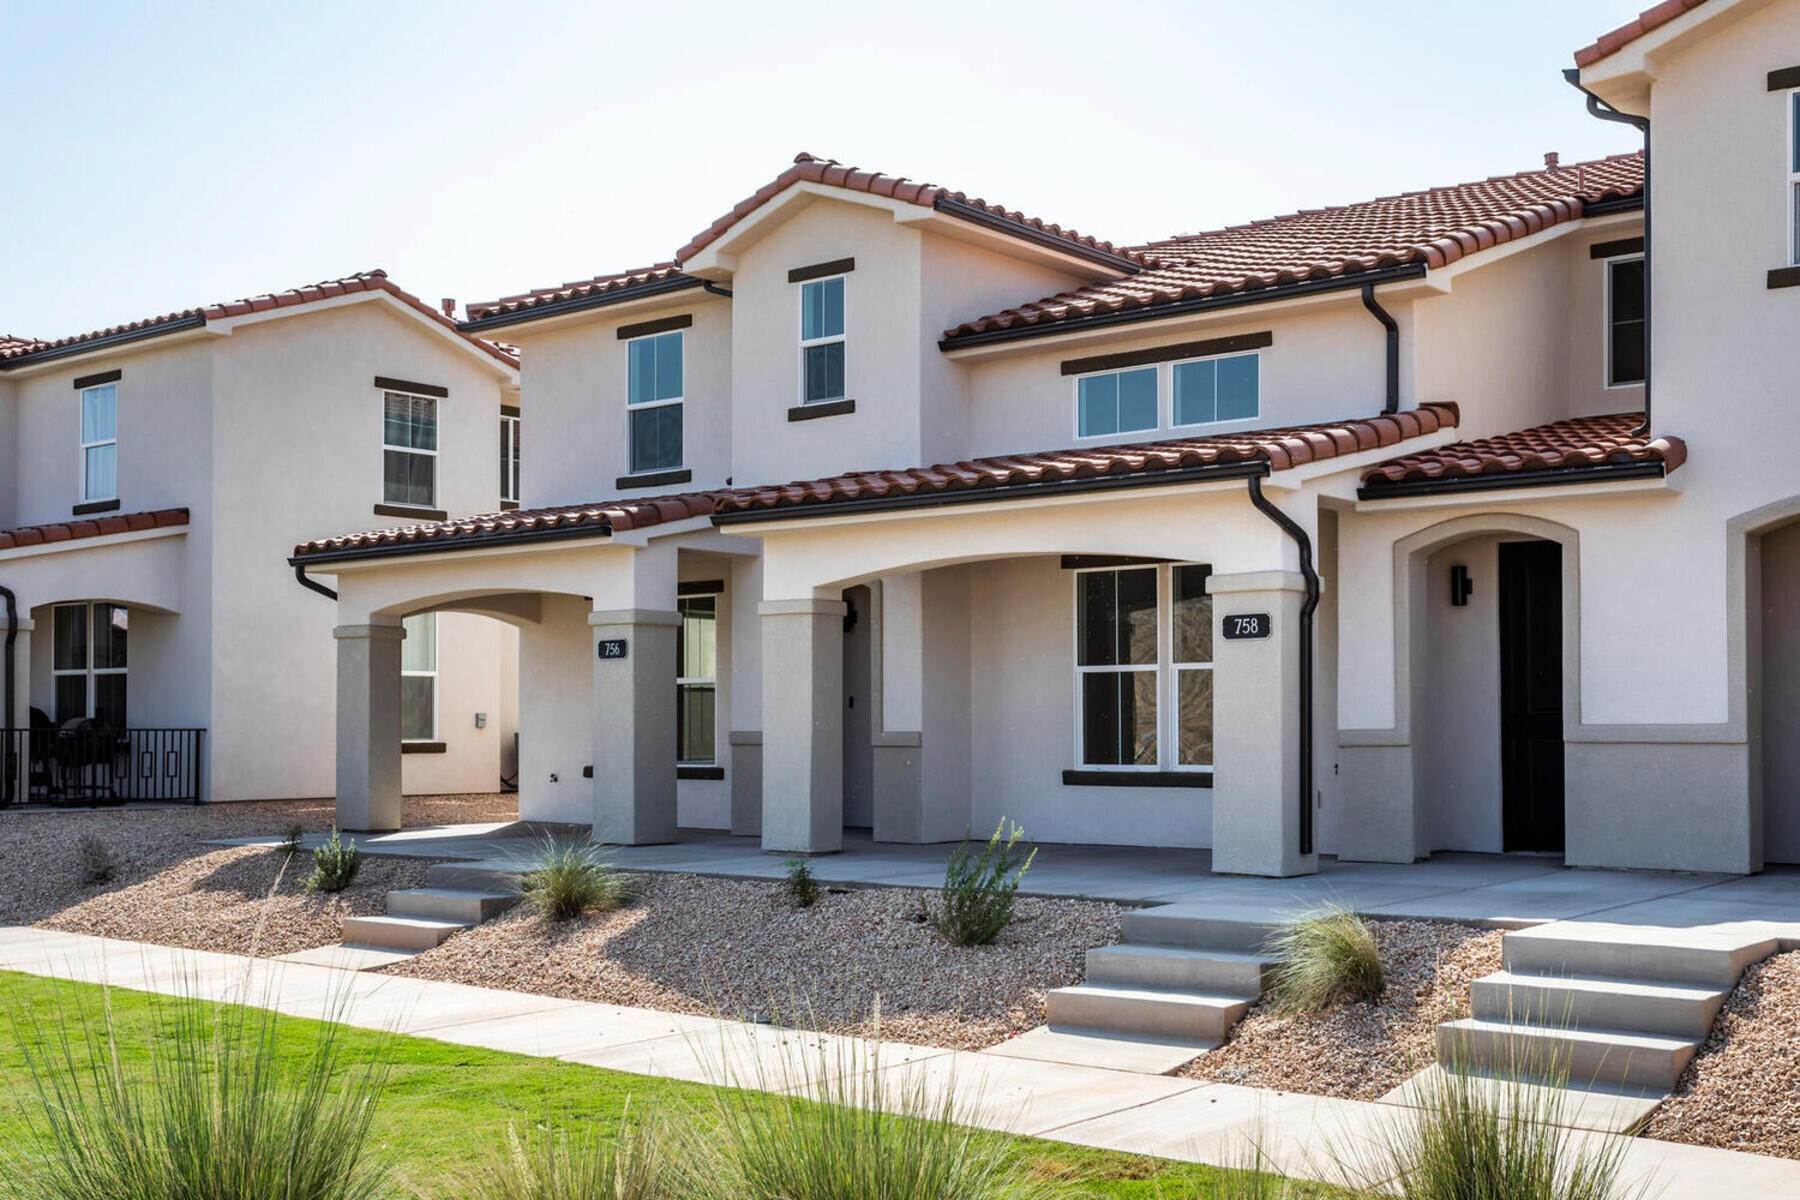 28. townhouses for Sale at New Southwestern Contemporary Townhomes with Incredible Amenities in St. George 692 W. Claystone Drive (Lot 12) St. George, Utah 84790 United States